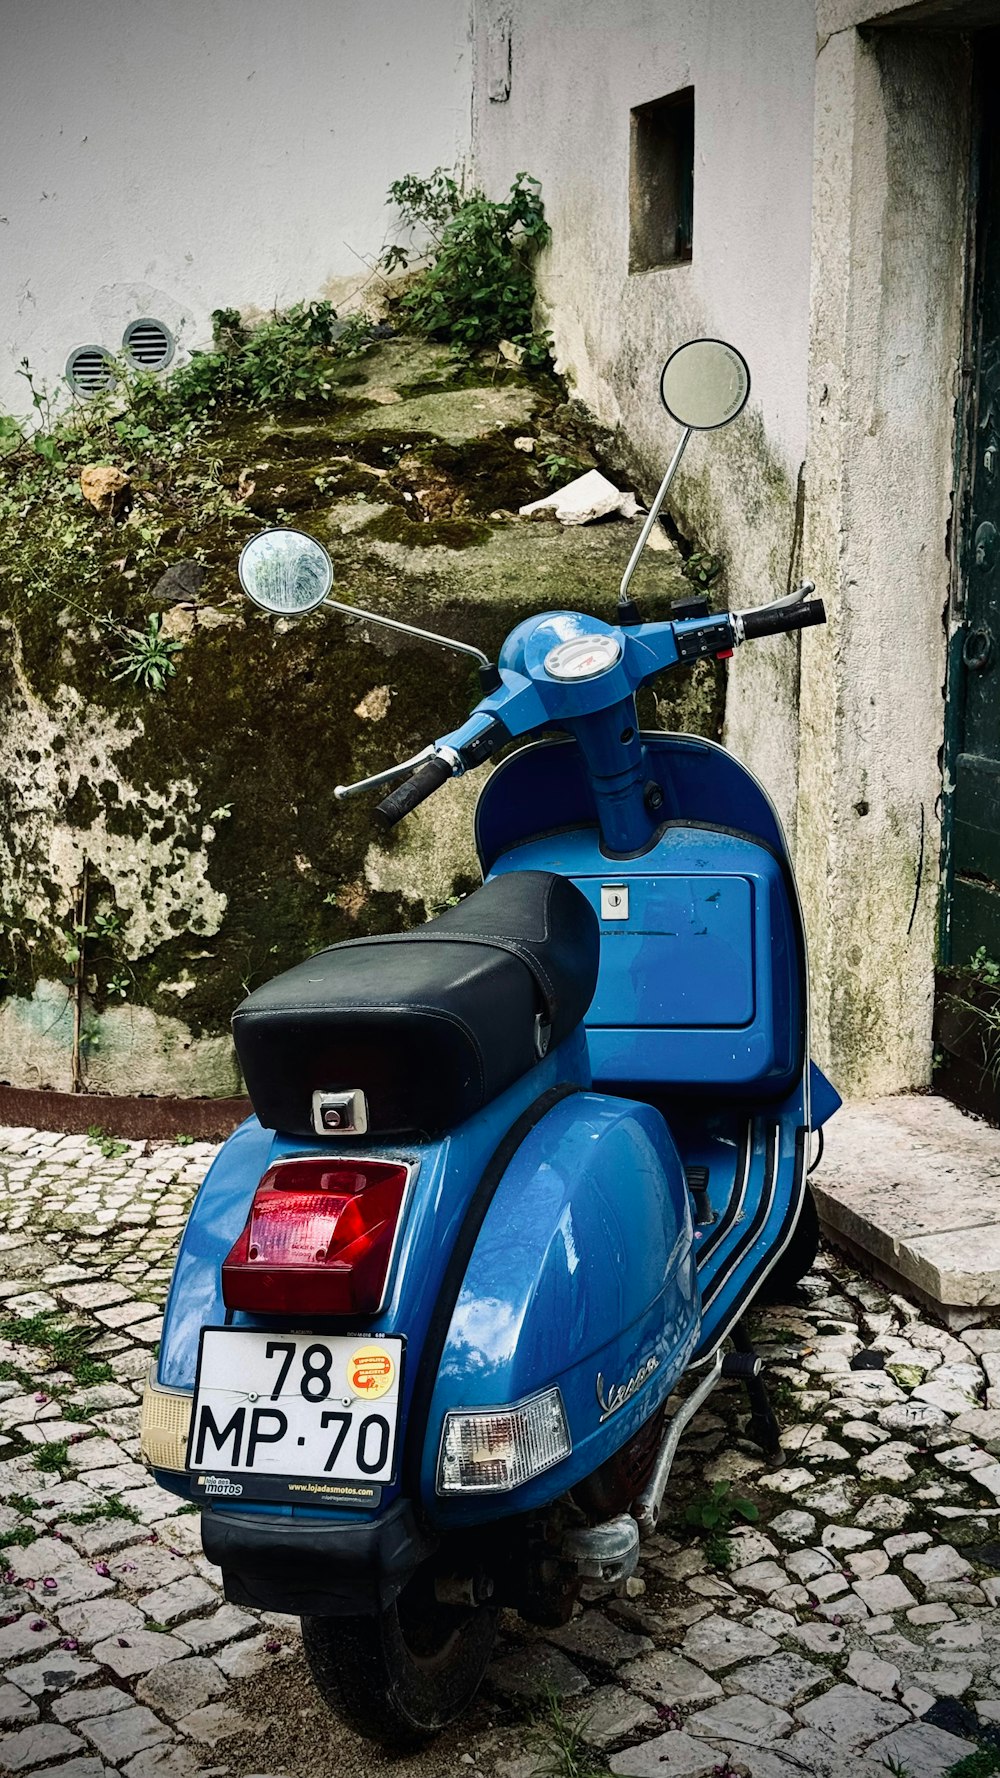 a blue scooter parked on a cobblestone street